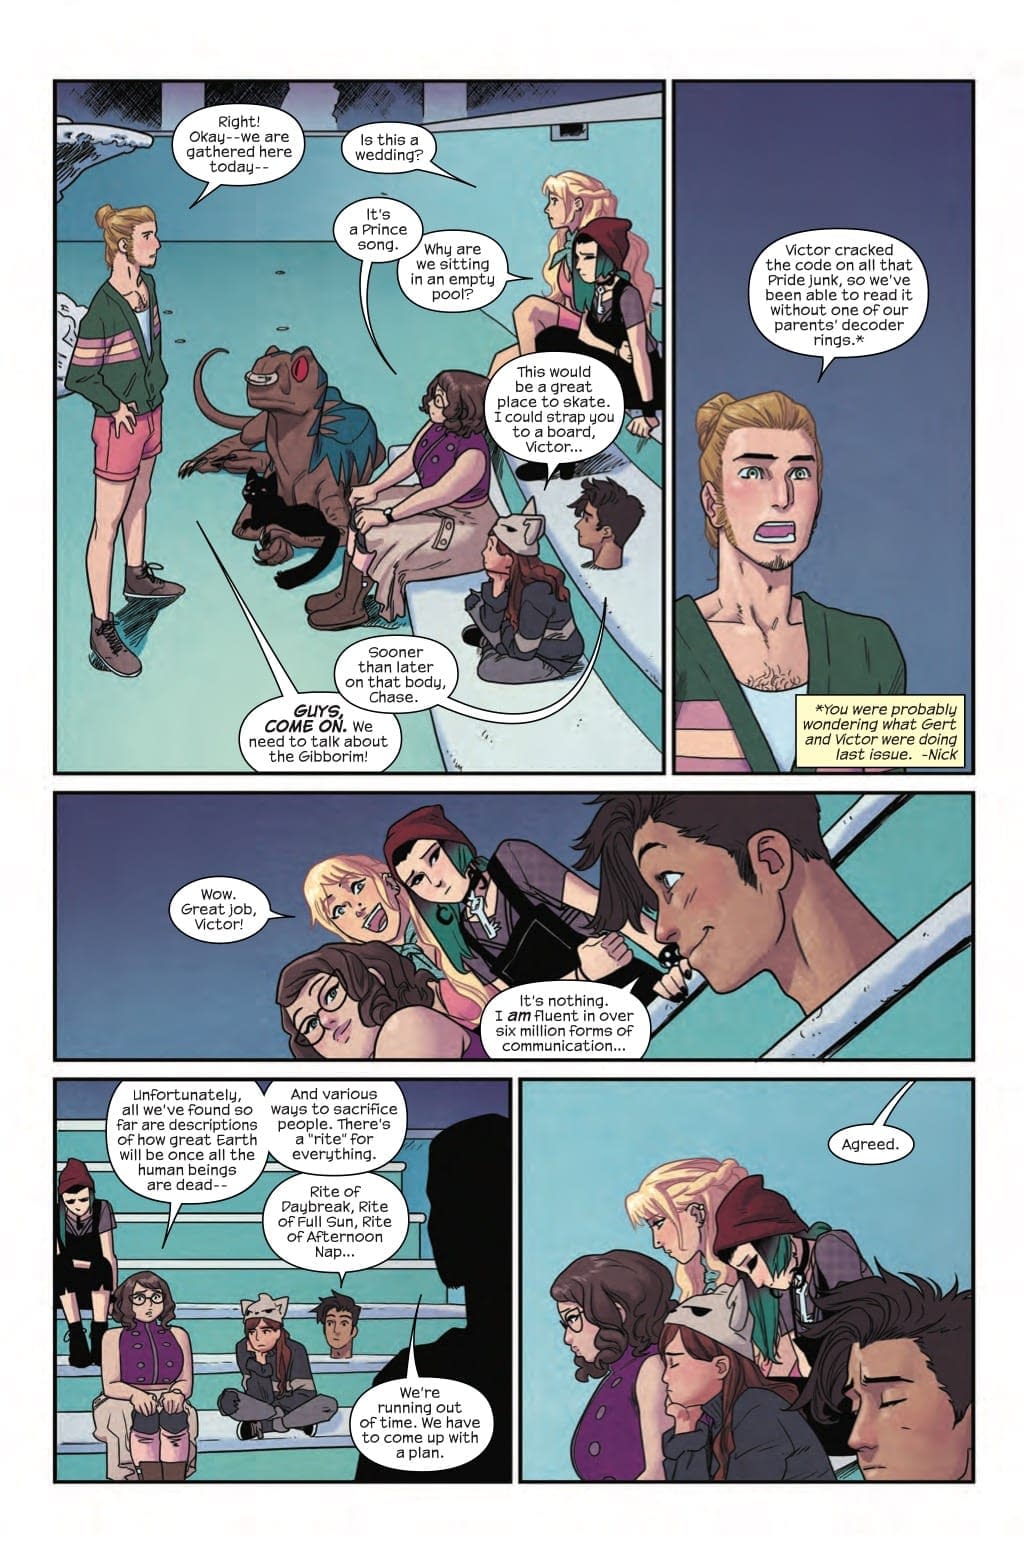 The World's Worst Pool Party in Next Week's Runaways #15